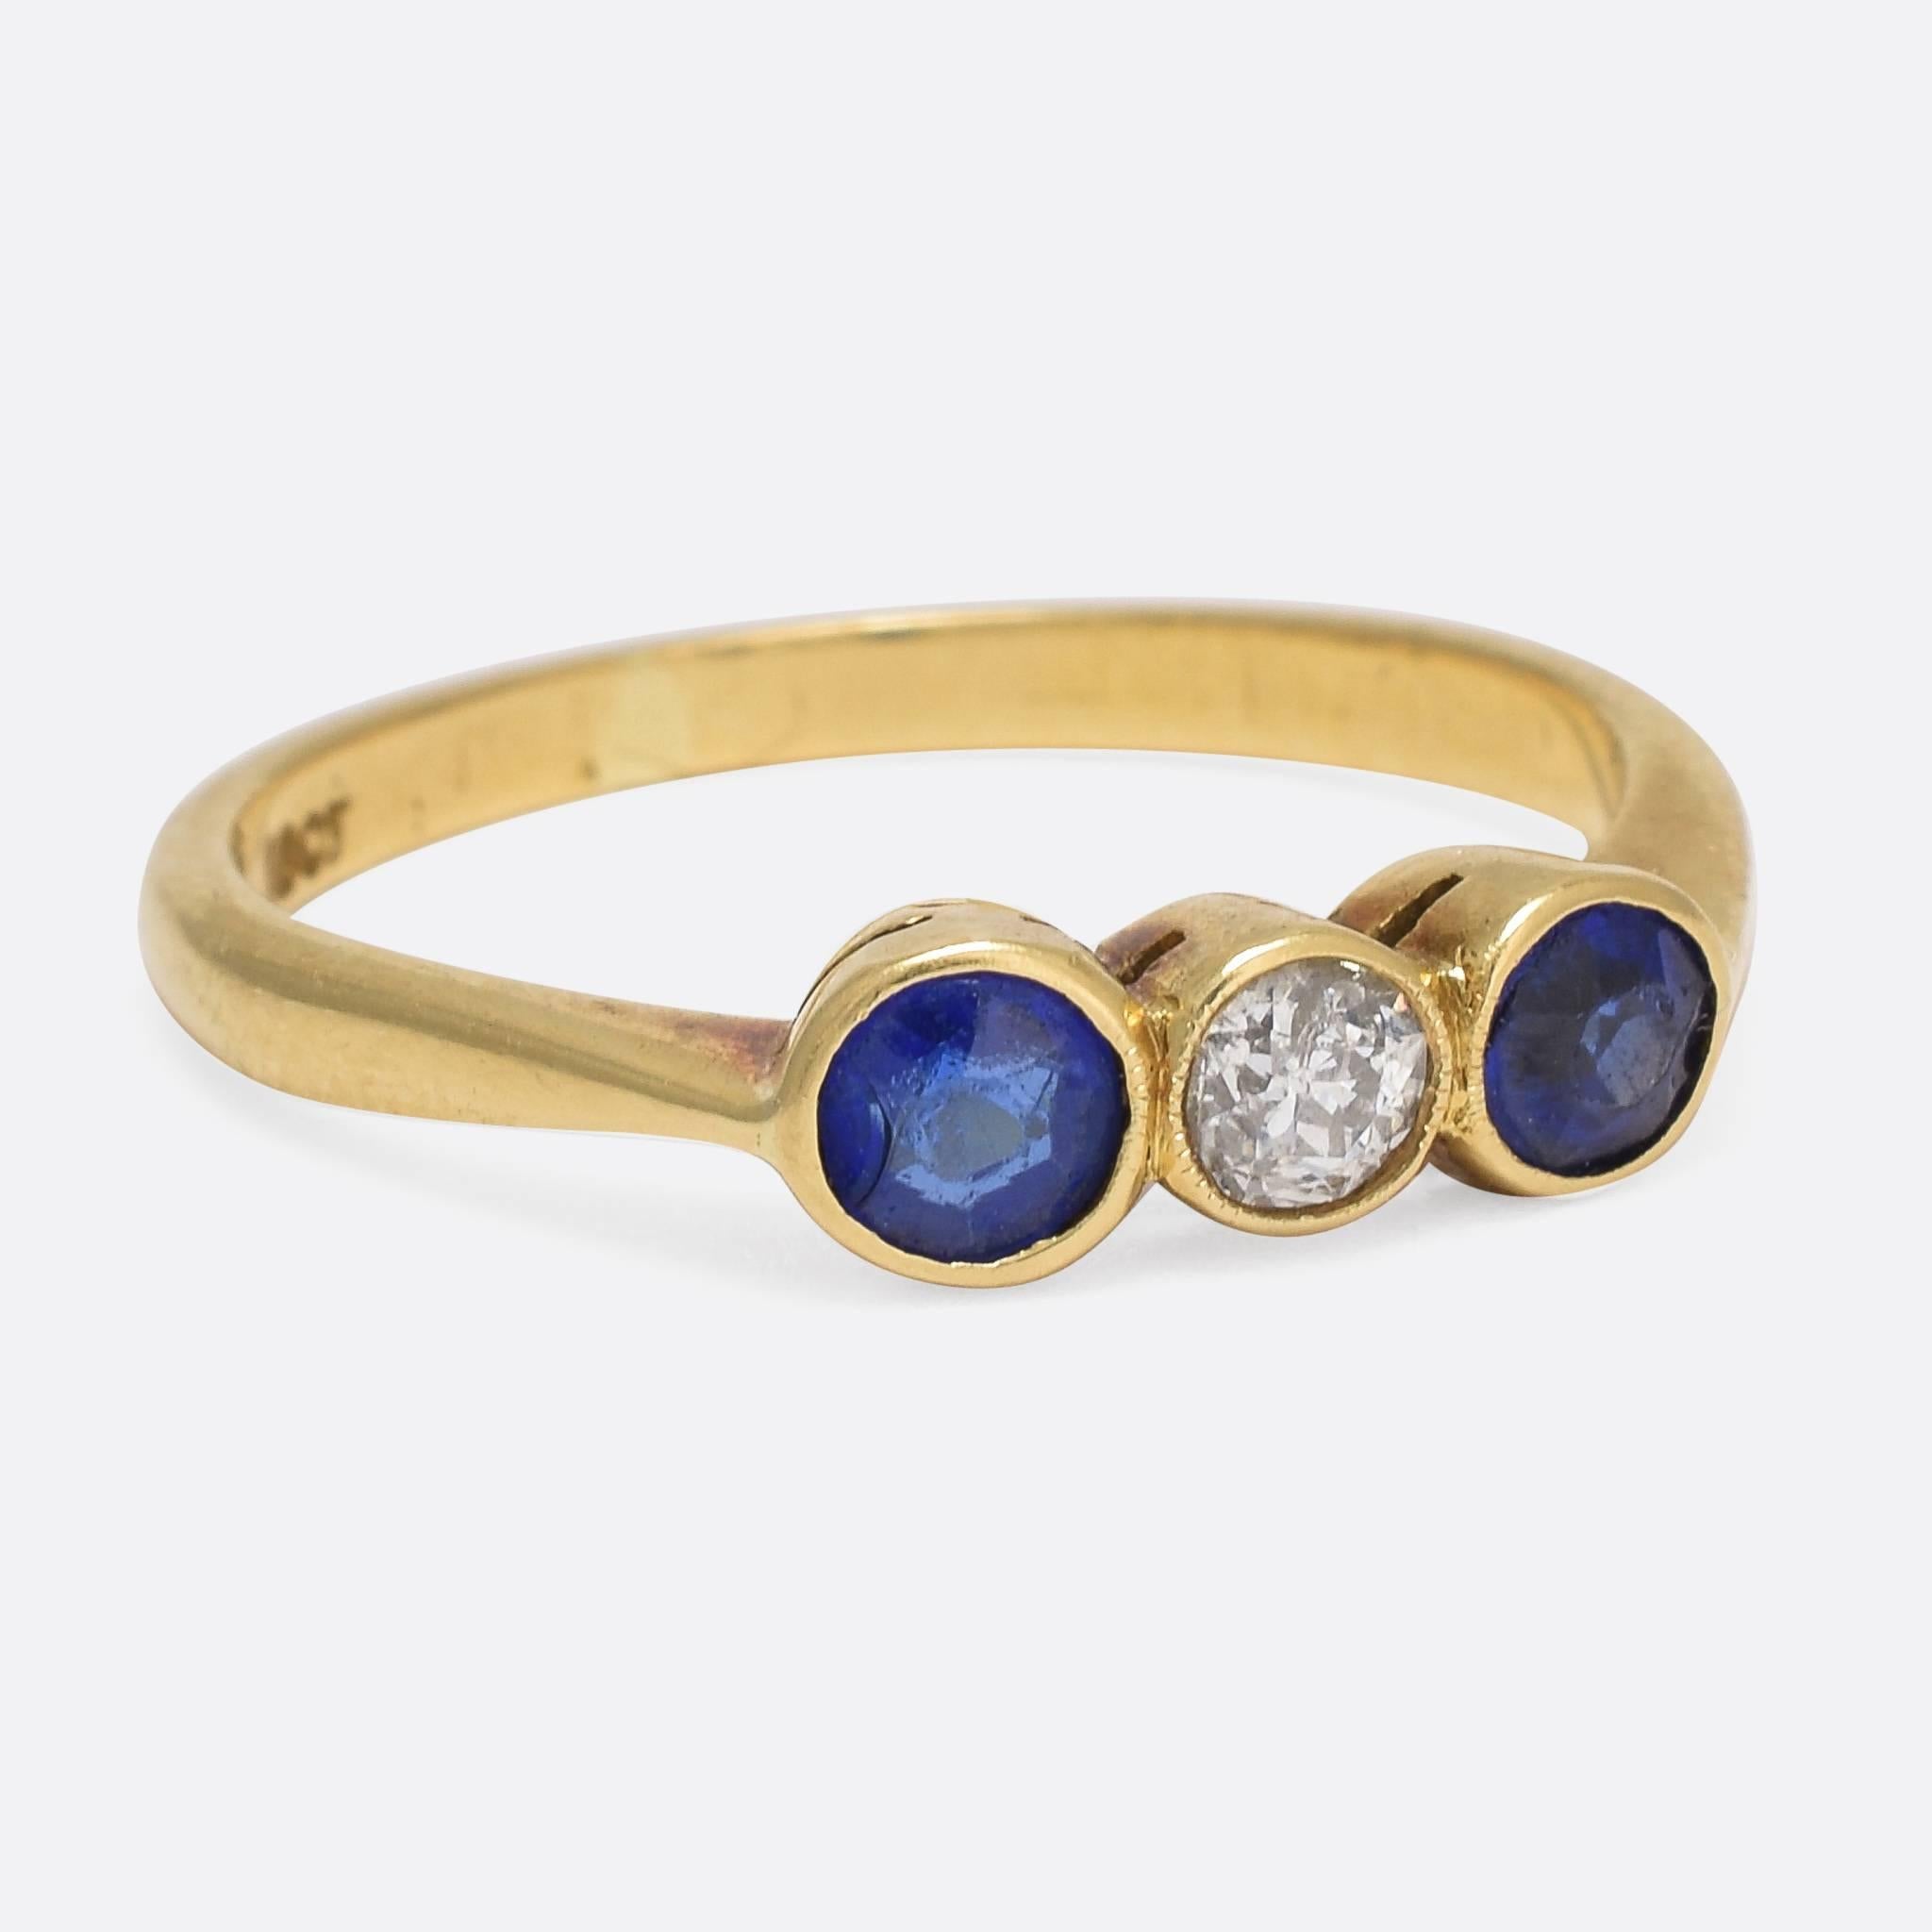 This pretty antique three-stone ring is set with a central old cut diamond, flanked by two vibrant blue sapphires (synthetic). The stones are bezel set, very typical of the period, with a subtle ring of millegrain around the diamond and cut-out